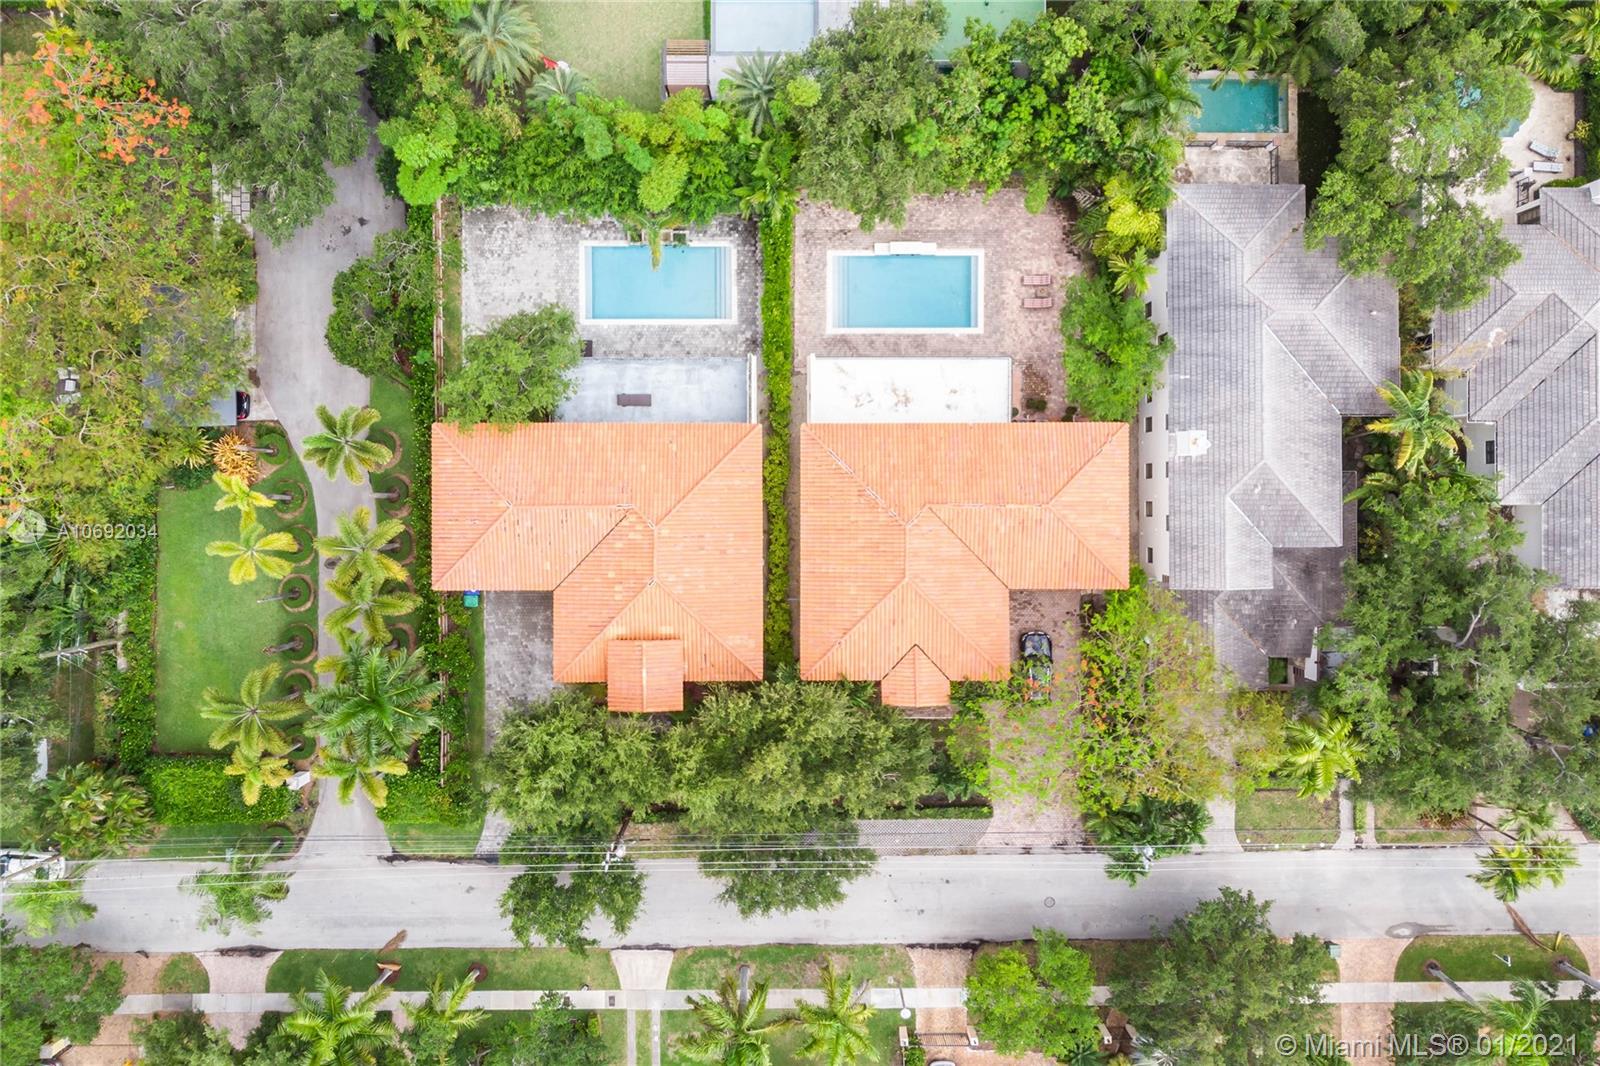 an aerial view of a house with a yard and plants